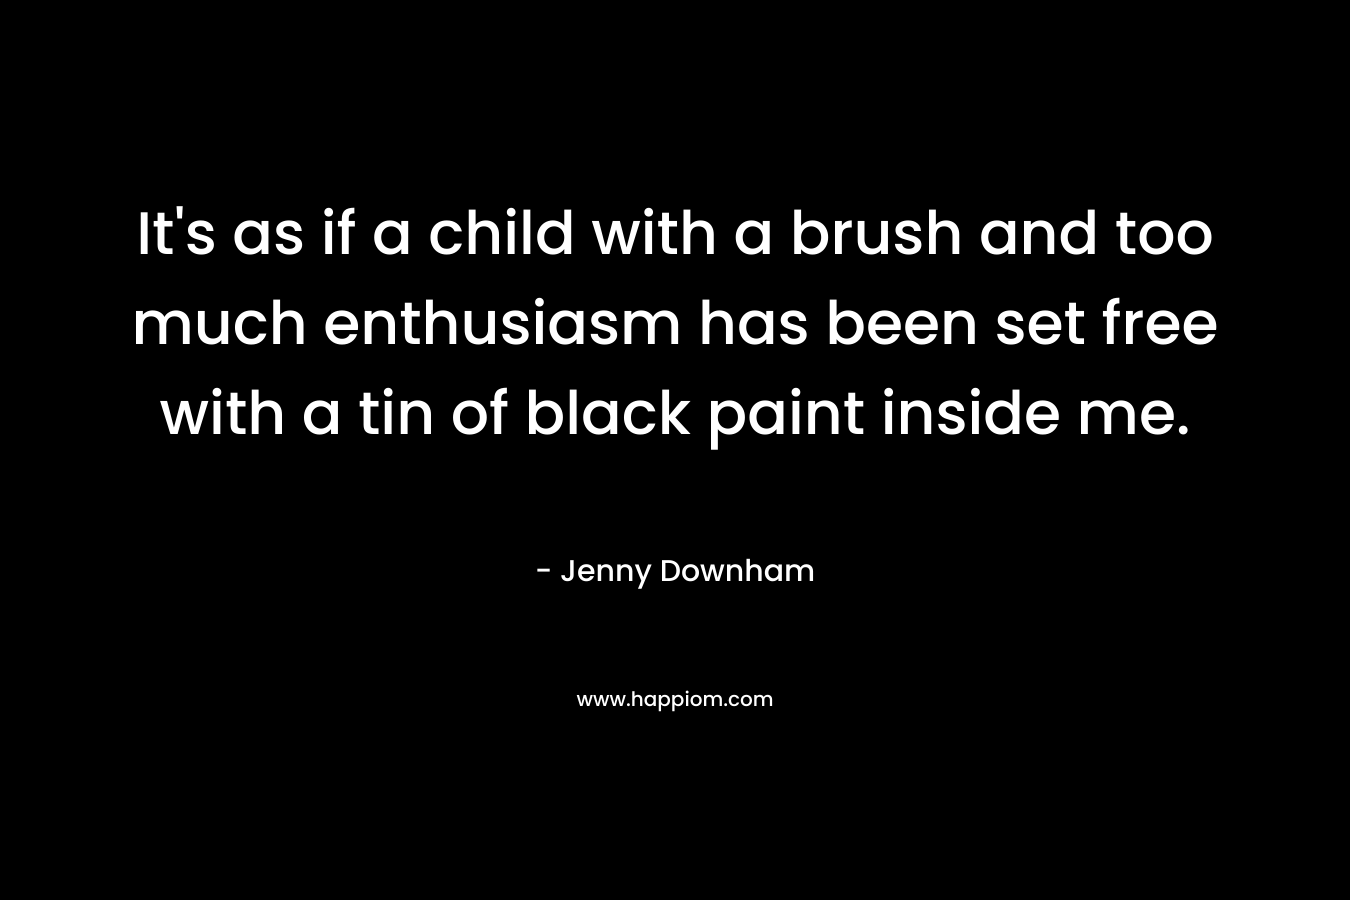 It's as if a child with a brush and too much enthusiasm has been set free with a tin of black paint inside me.